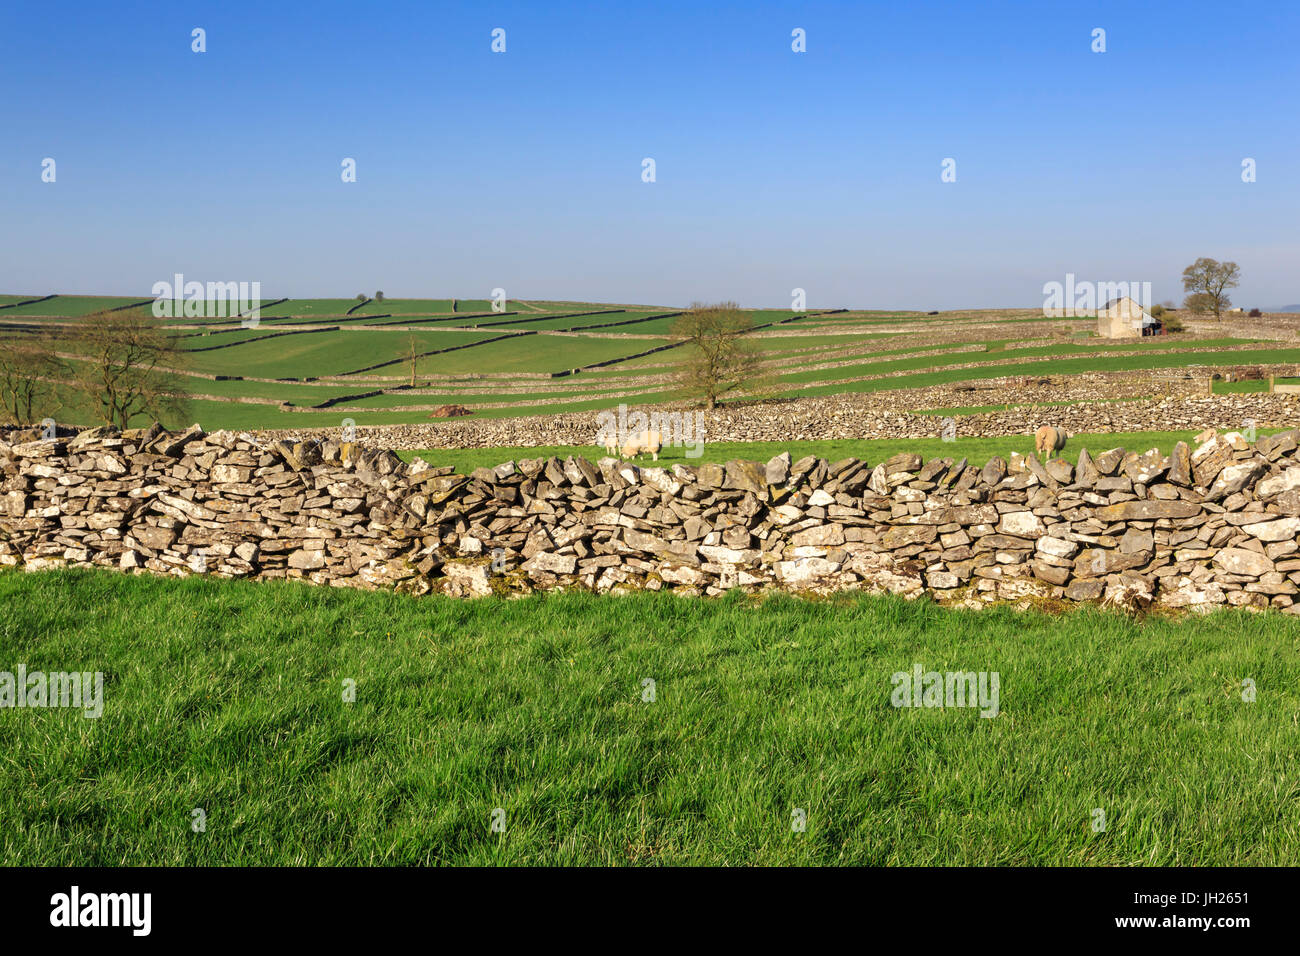 Typical spring landscape of barn, sheep, fields, dry stone walls and hills, Litton, Peak District, Derbyshire, England, UK Stock Photo